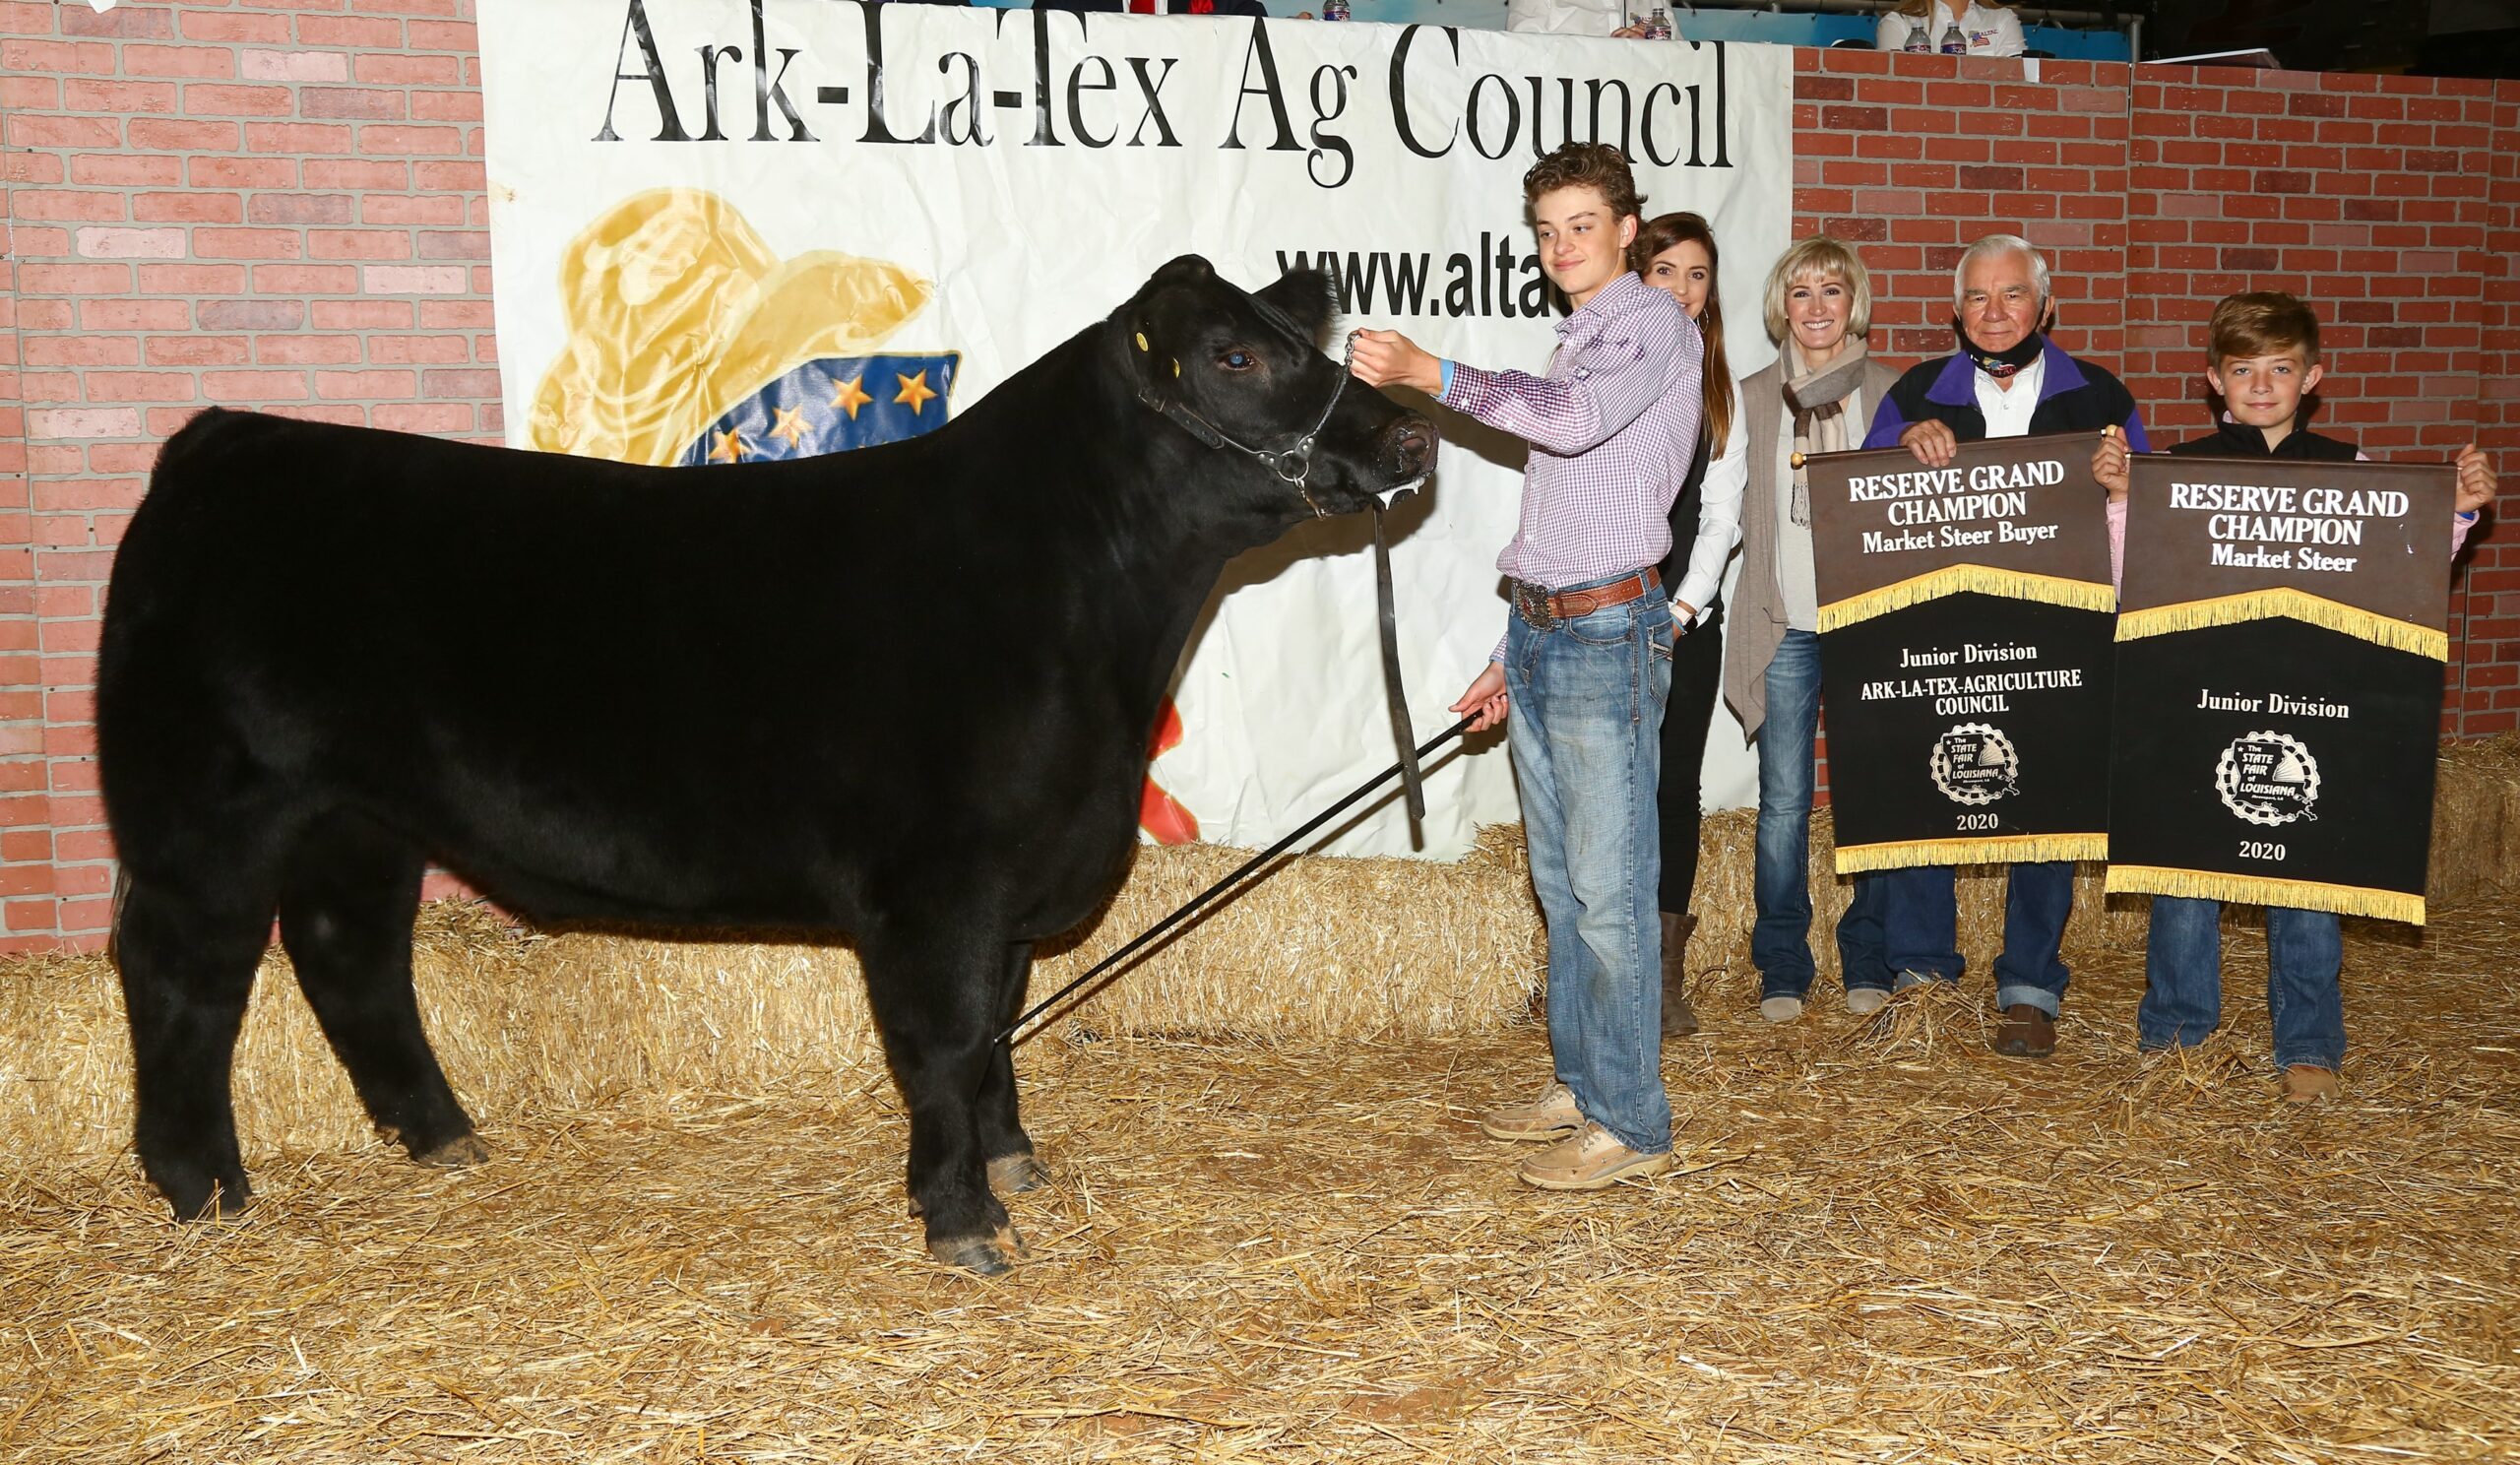 RC steer Luke Domingue -Lafayette buyer Manpower Tempory Services, Rotary Club of S’port, Commisioner Strain, DVM